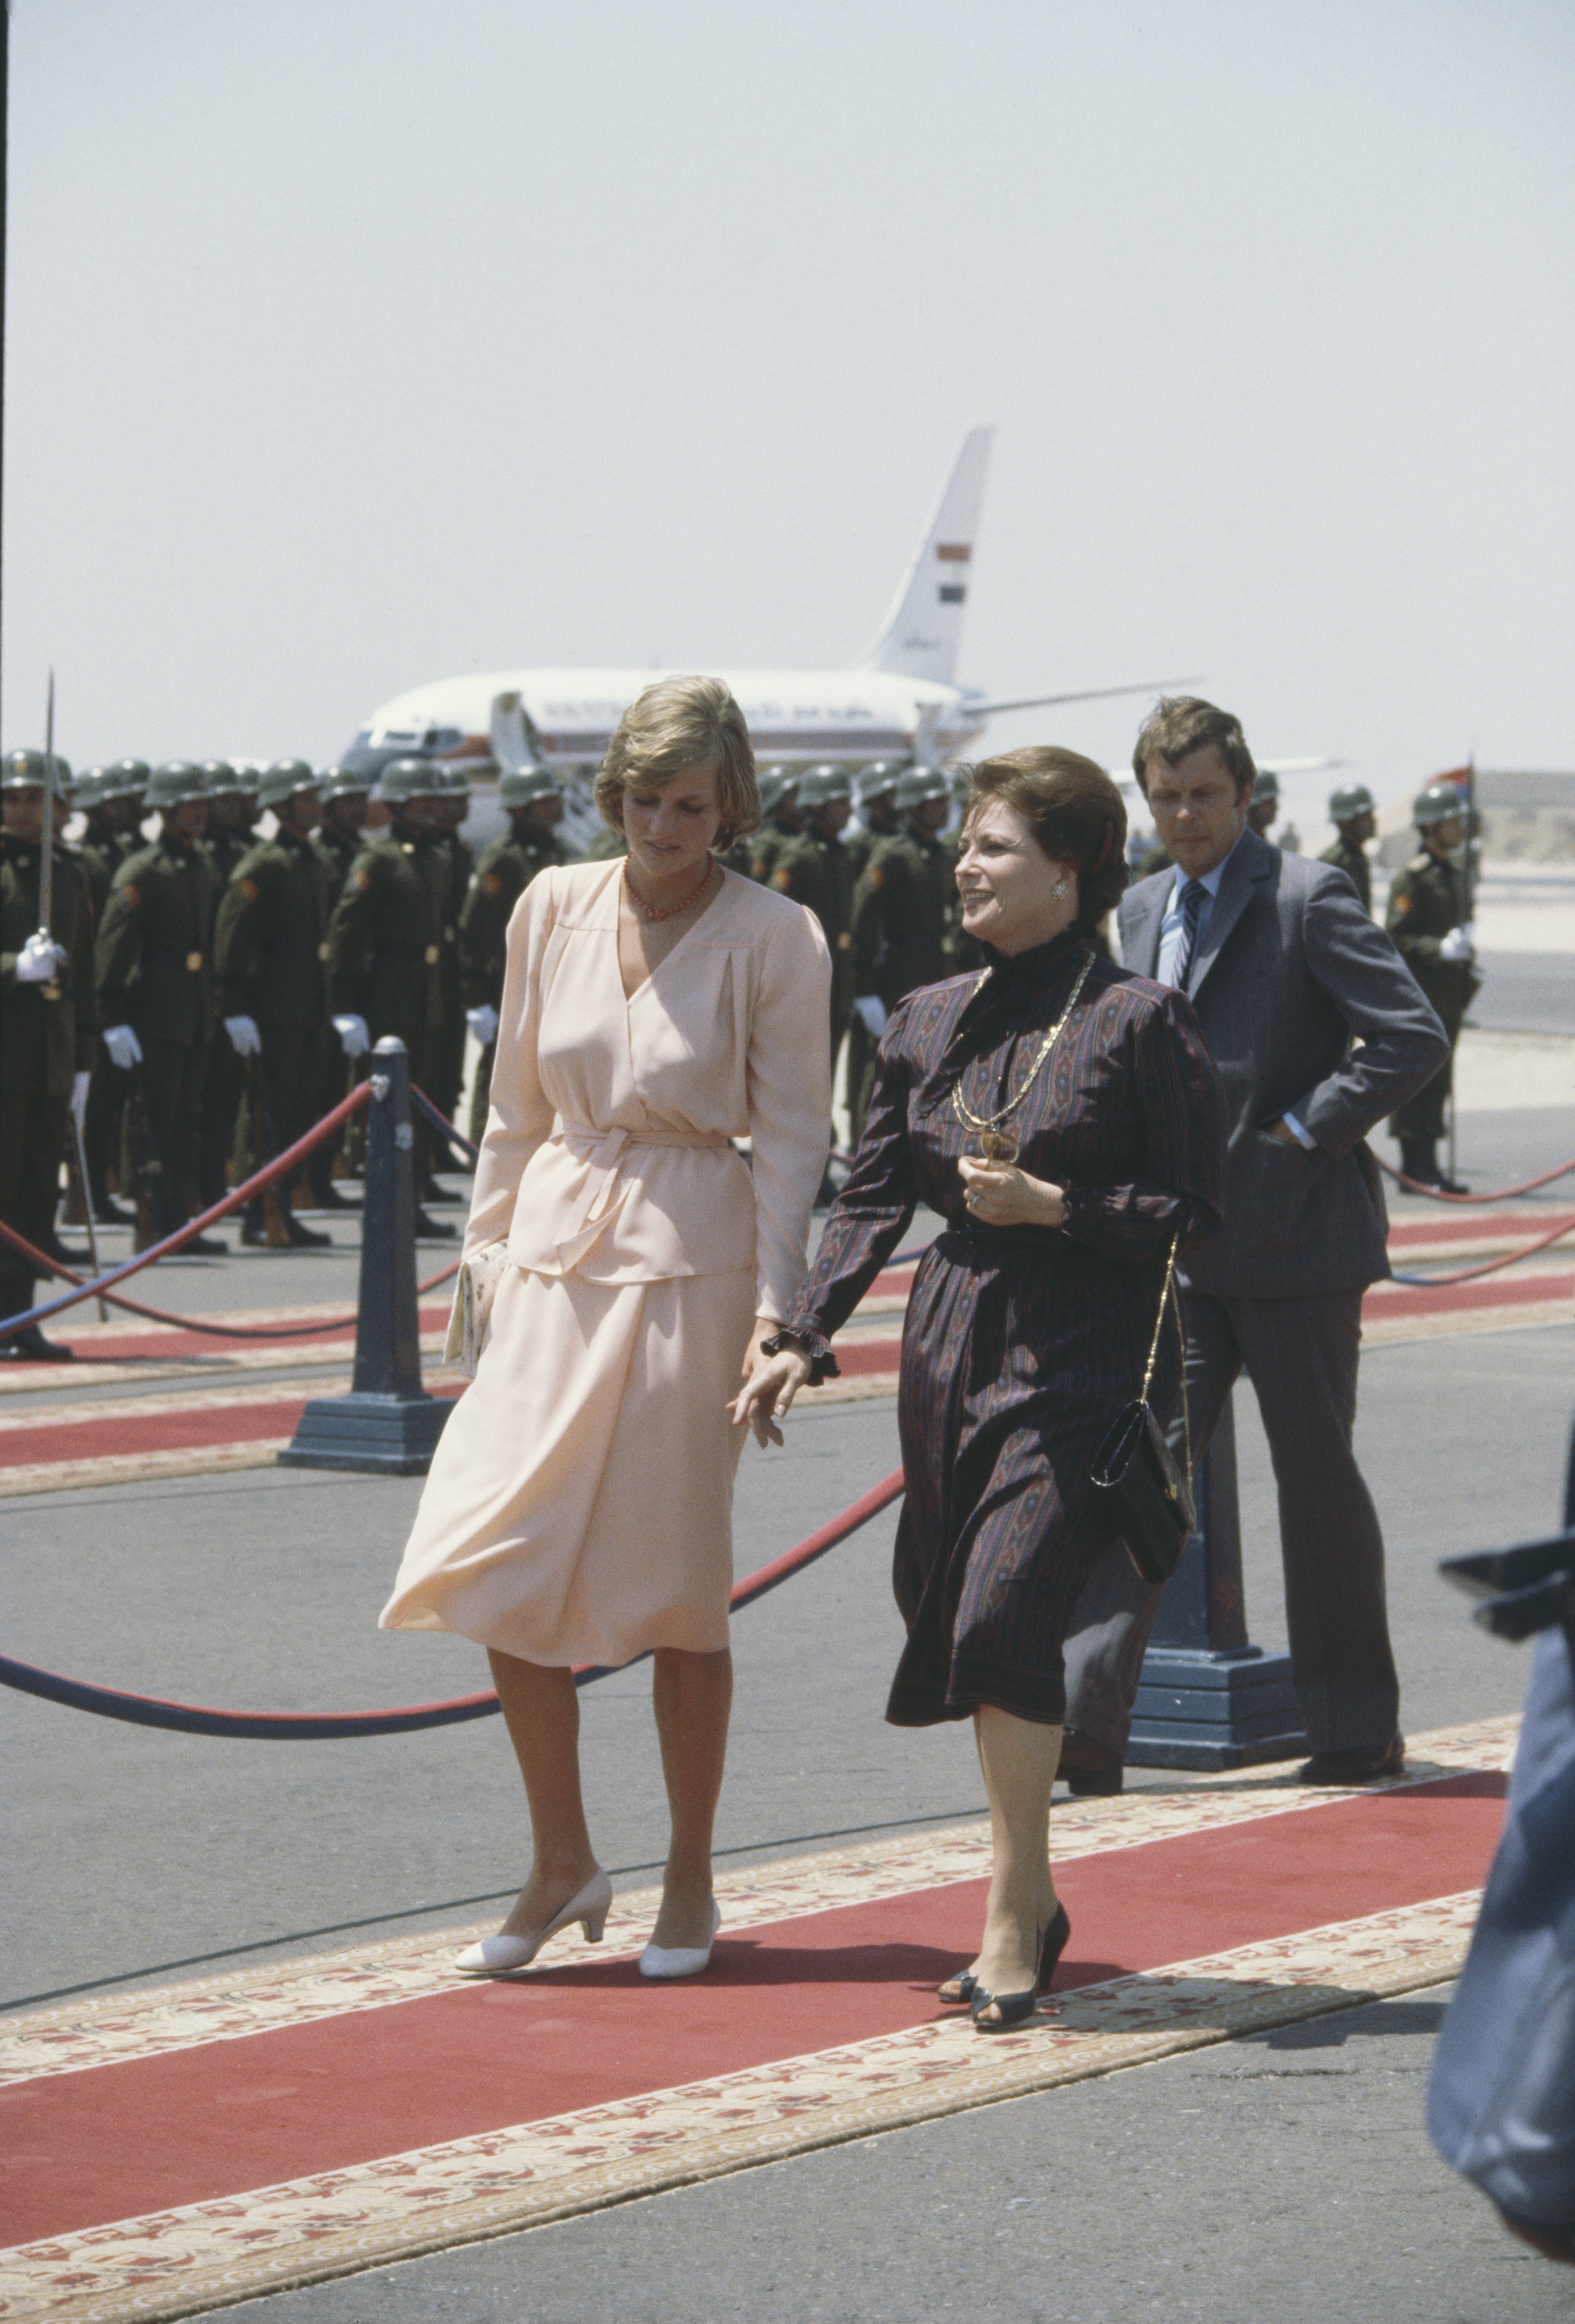 The Princess of Wales, Diana, with Jehan Sadat, wife of the Egyptian president at Hurghada International Airport on August 15 1981. / Source: Getty Images